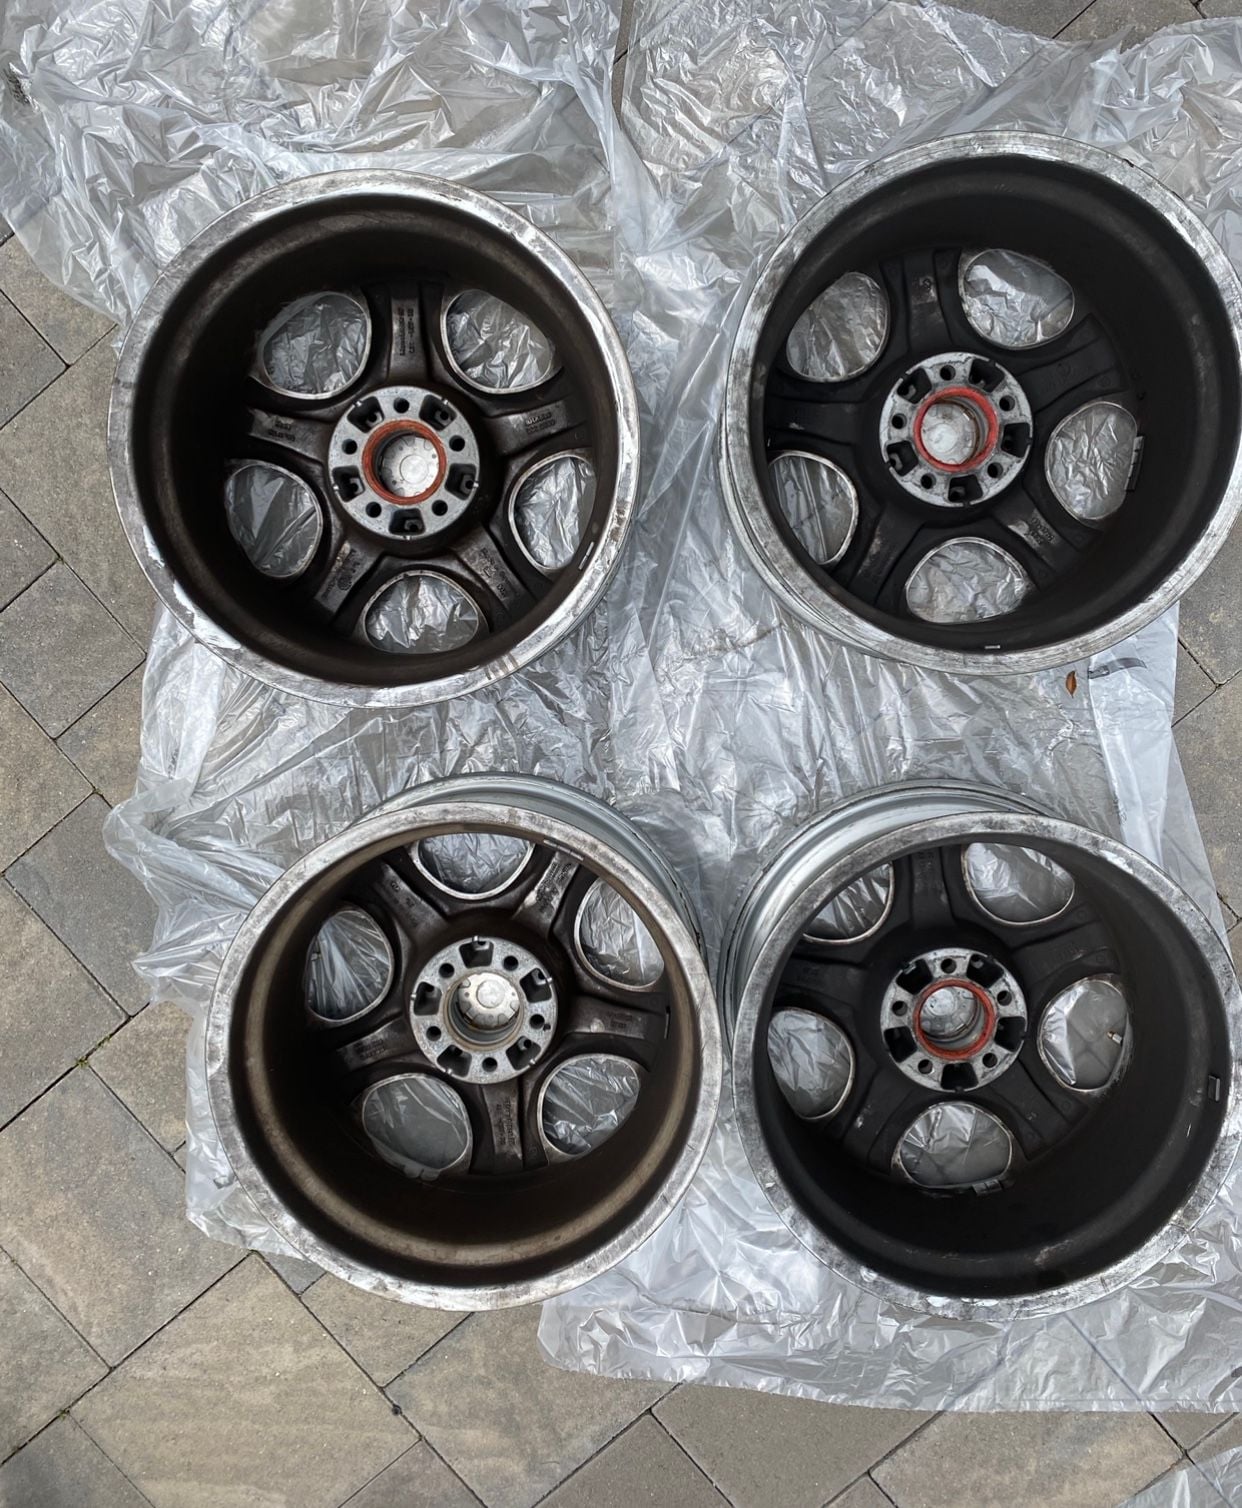 Wheels and Tires/Axles - Brabus Monoblock IV 17" inches - Used - 1993 to 2000 Mercedes-Benz C43 AMG - 1997 to 2002 Mercedes-Benz E430 - 1998 to 2002 Mercedes-Benz CLK55 AMG - Los Angeles, CA 91302, United States